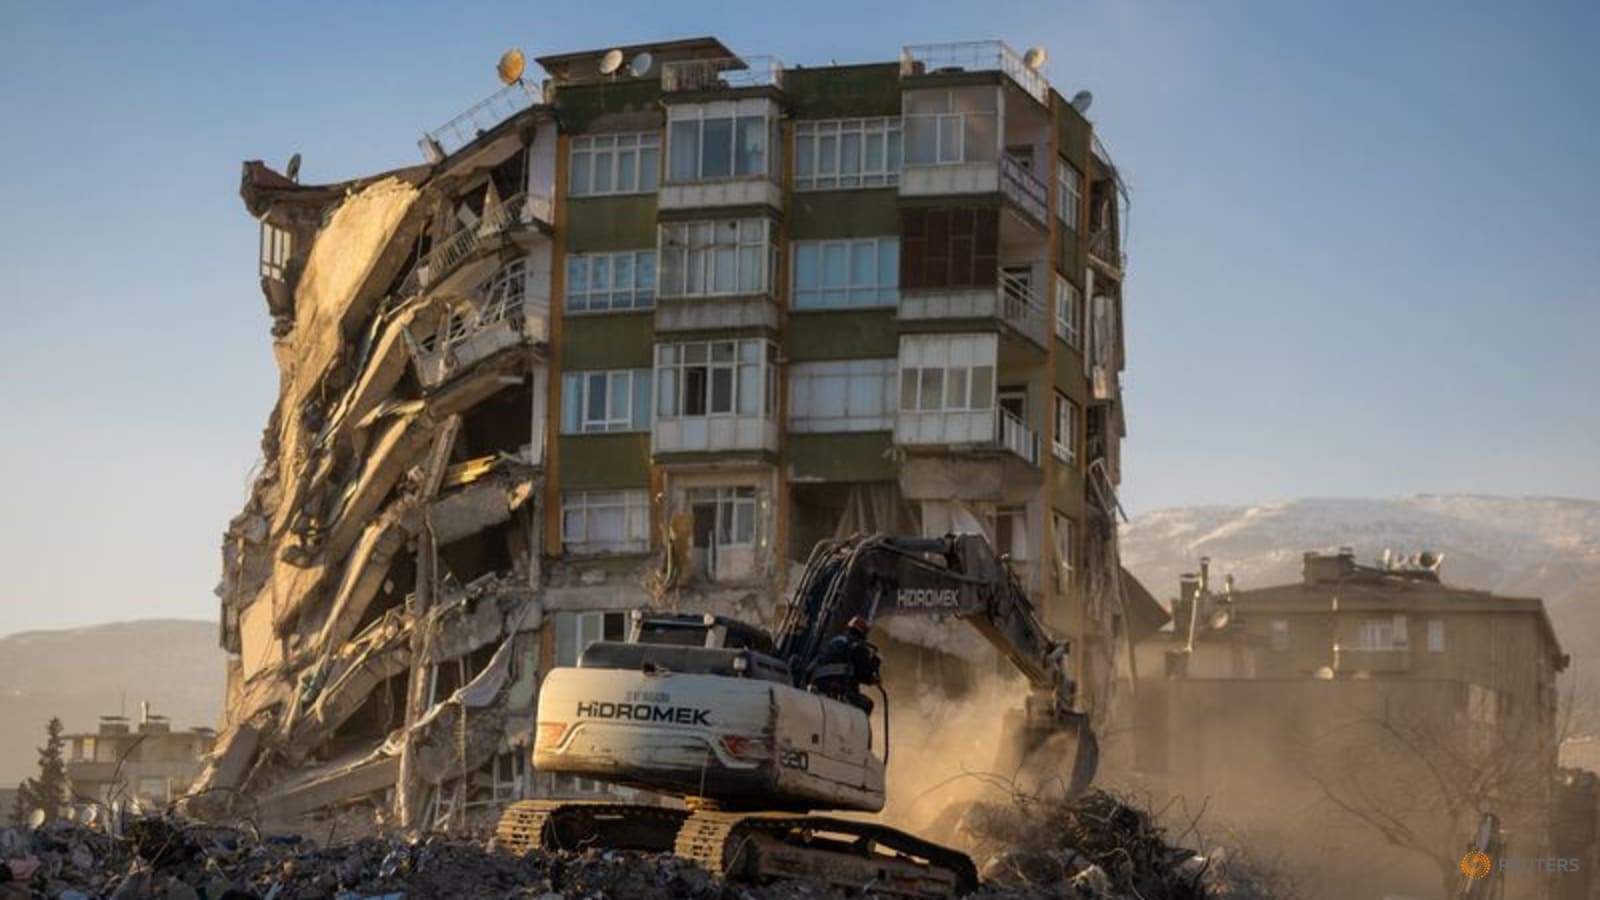 turkiye-syria-earthquake-death-toll-passes-45,000;-many-still-missing-in-flattened-apartments